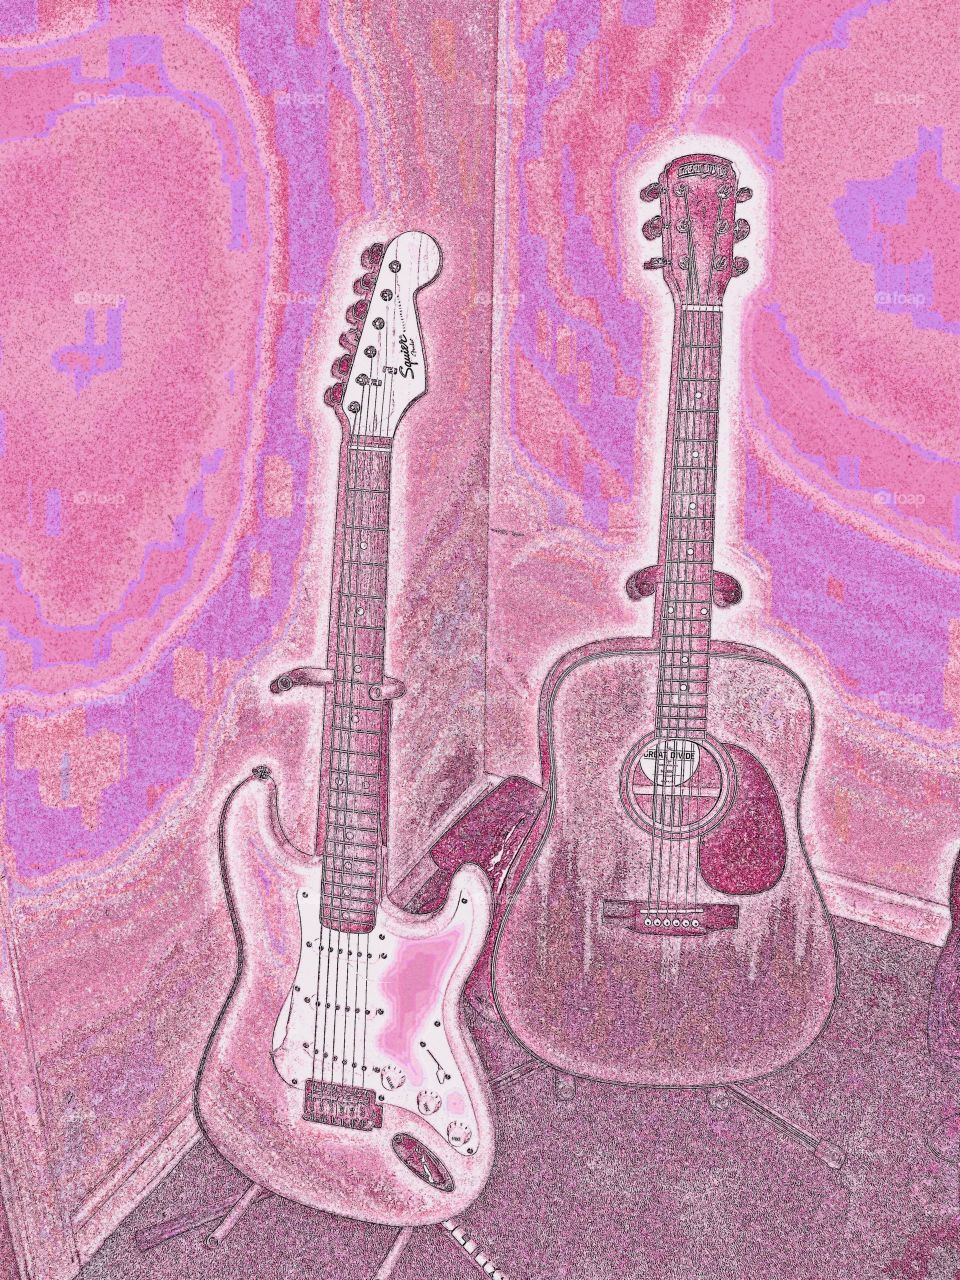 Psychedelic  Guitars